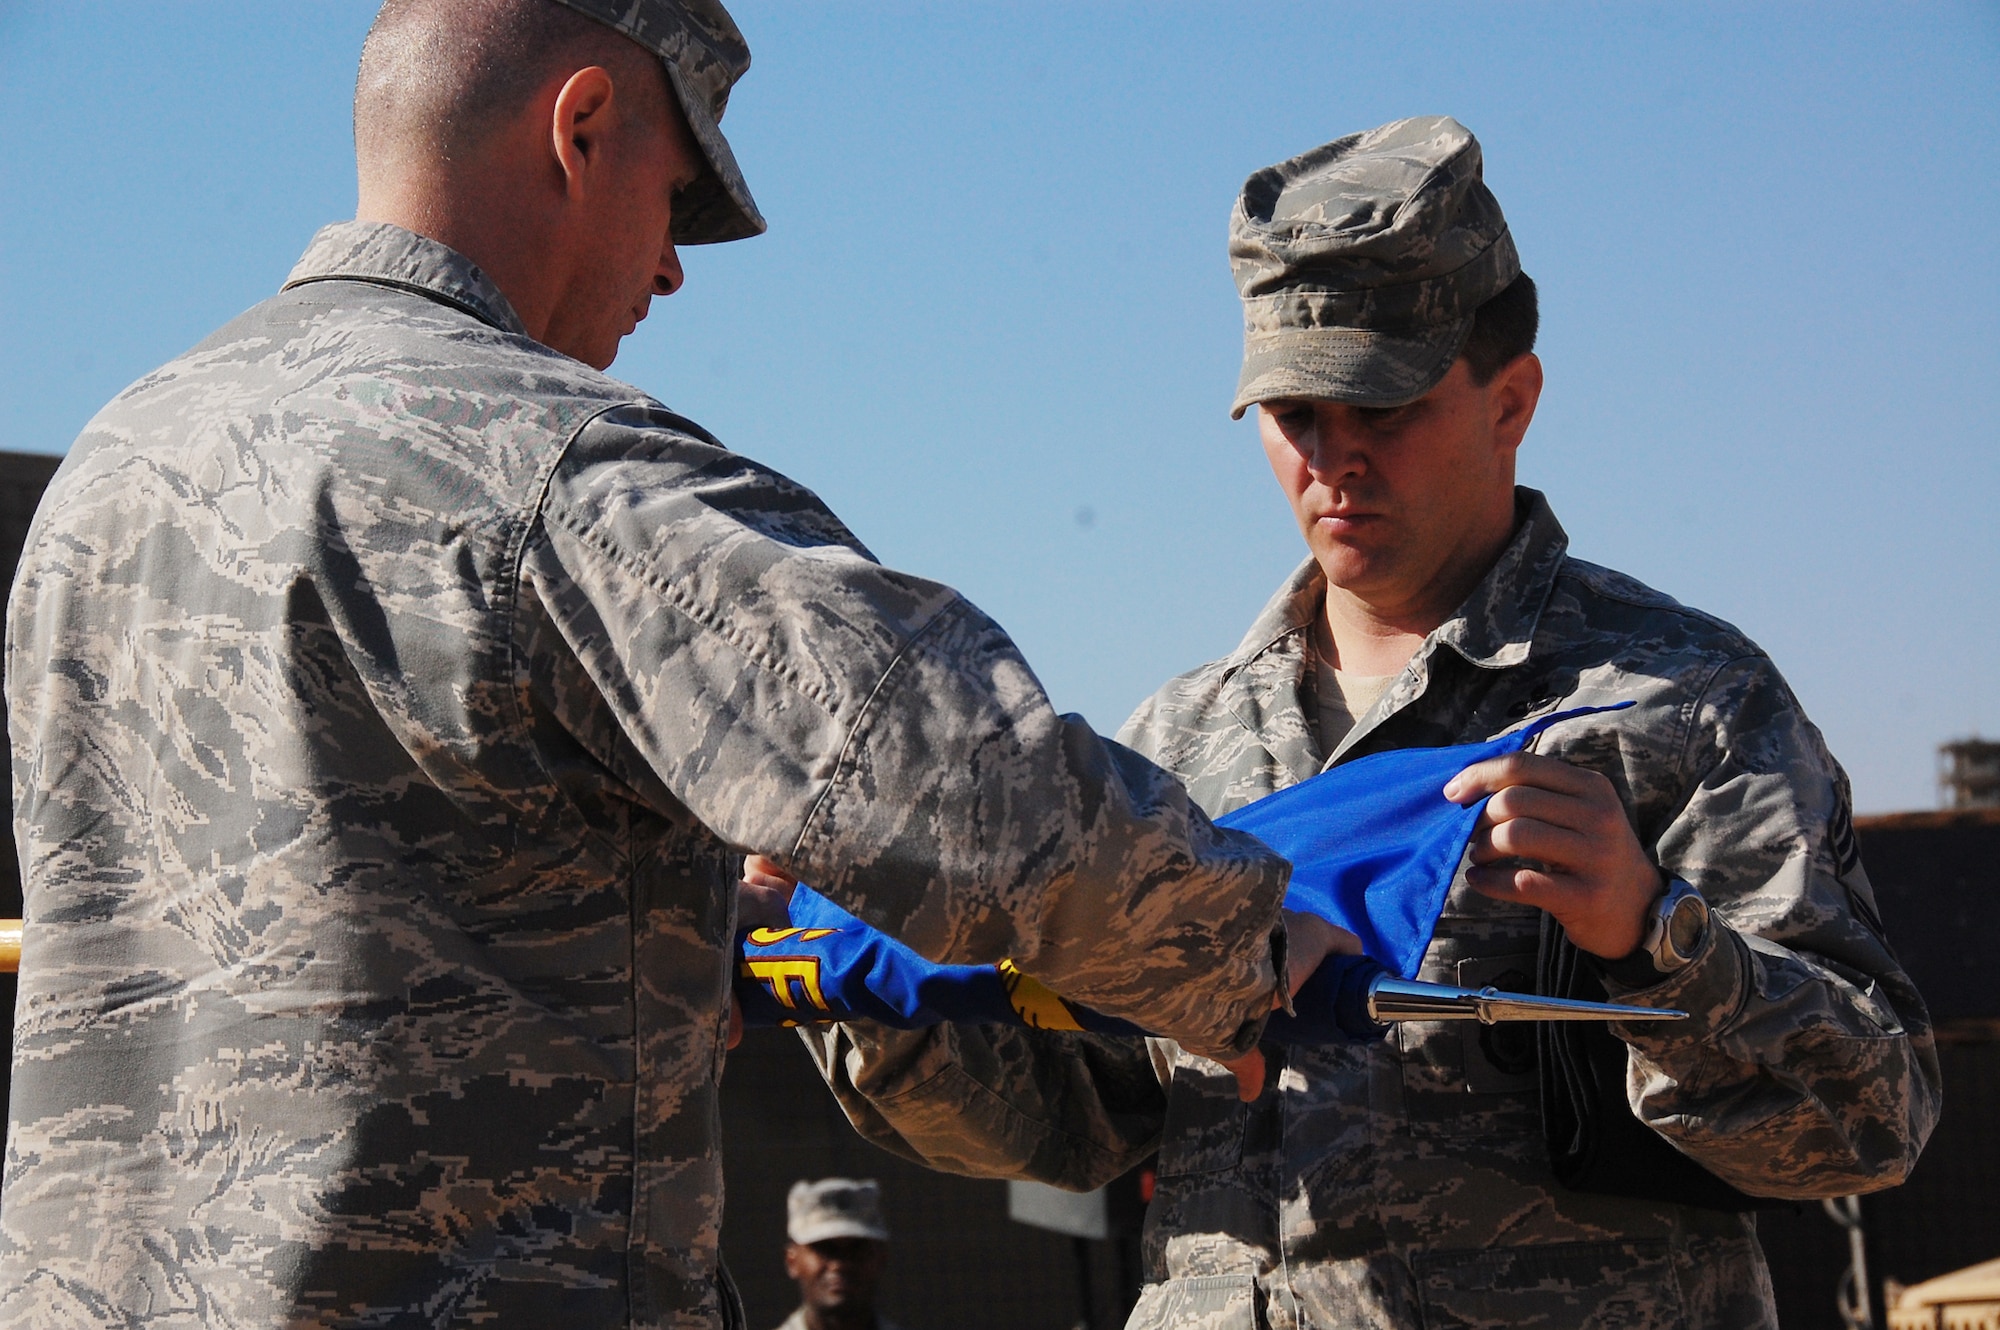 Maj. Larry Woodleft and Chief Master Sgt. James Johnson furl the 887th ESFS guidon during the squadron's deactivation ceremony Dec. 3, 2009 at Camp Bucca, Iraq. Major Woodleft is the 887th Expeditionary Security Forces Squadron commander. (U.S. Air Force photo/Staff Sgt. Shaun Emery)
